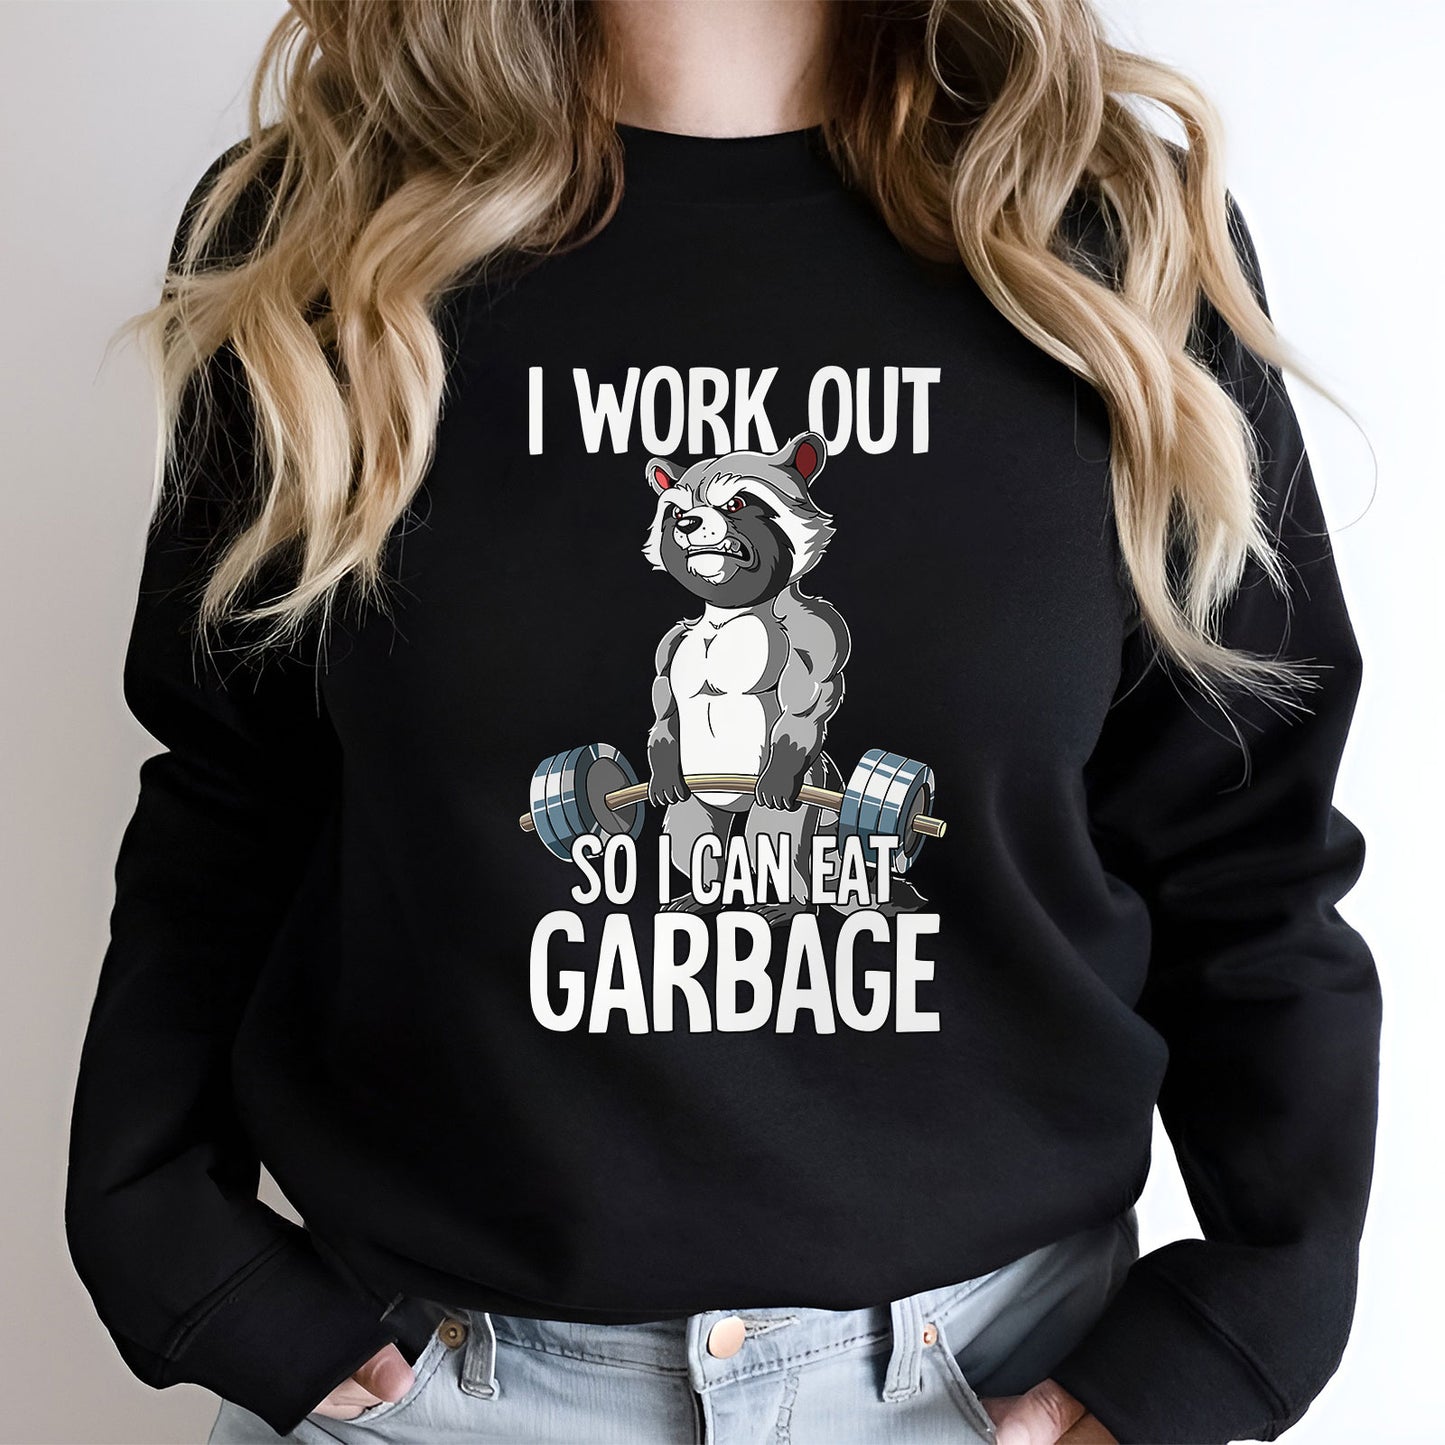 Workout - I Workout So I Can Eat Garbage - Personalized Shirt